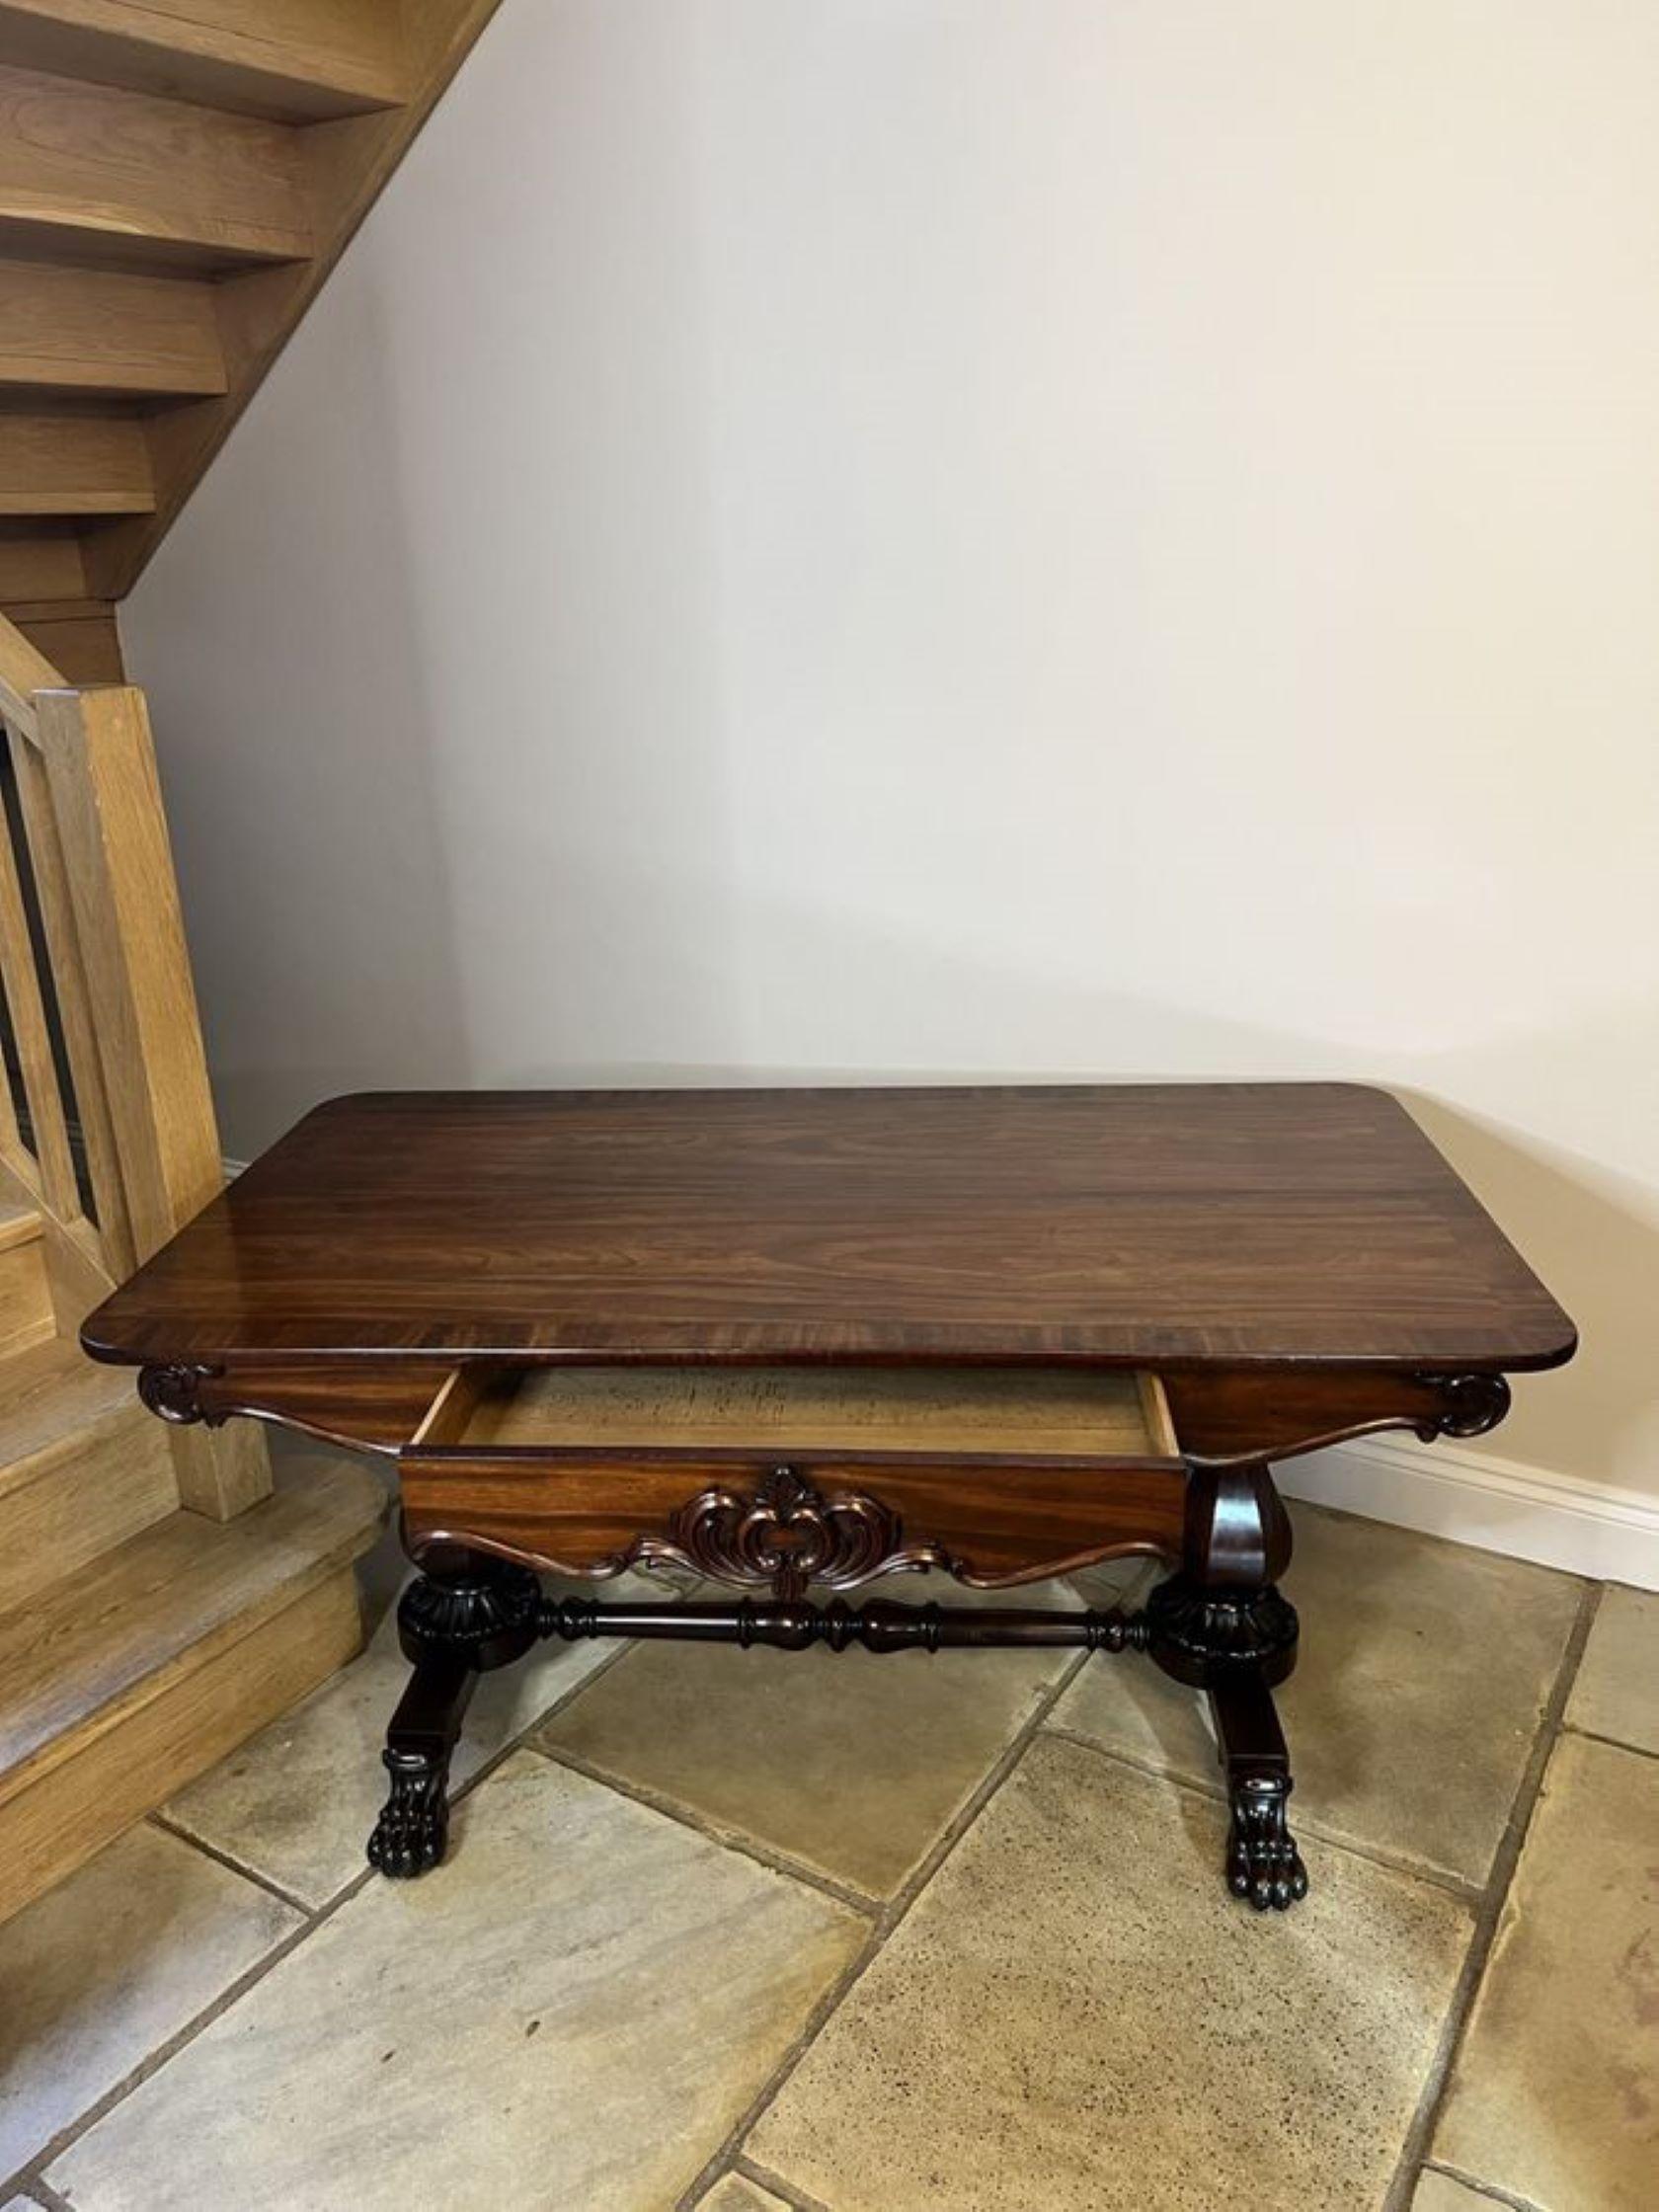 Superb quality antique William IV large freestanding library centre table having a large figured mahogany top with a crossbanded edge, carved mahogany freestanding shaped frieze, one single drawer, supported by supports with carved collars, standing